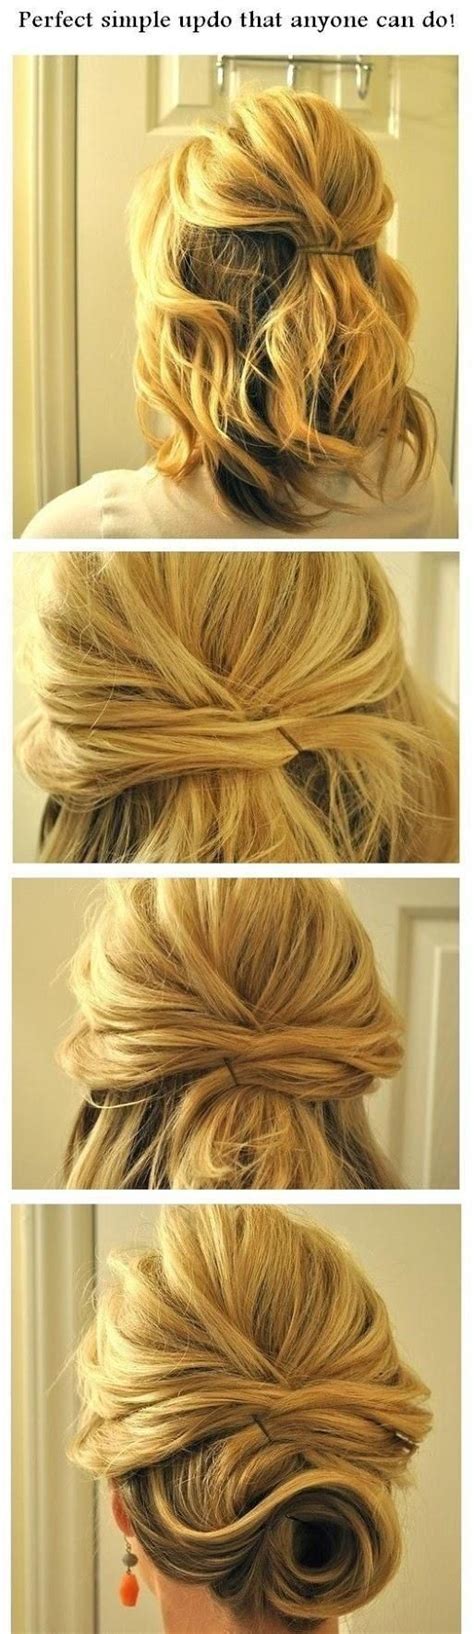 Wrap your braids and pin them into place. 14 Easy Step by Step Updo Hairstyles Tutorials - Pretty ...